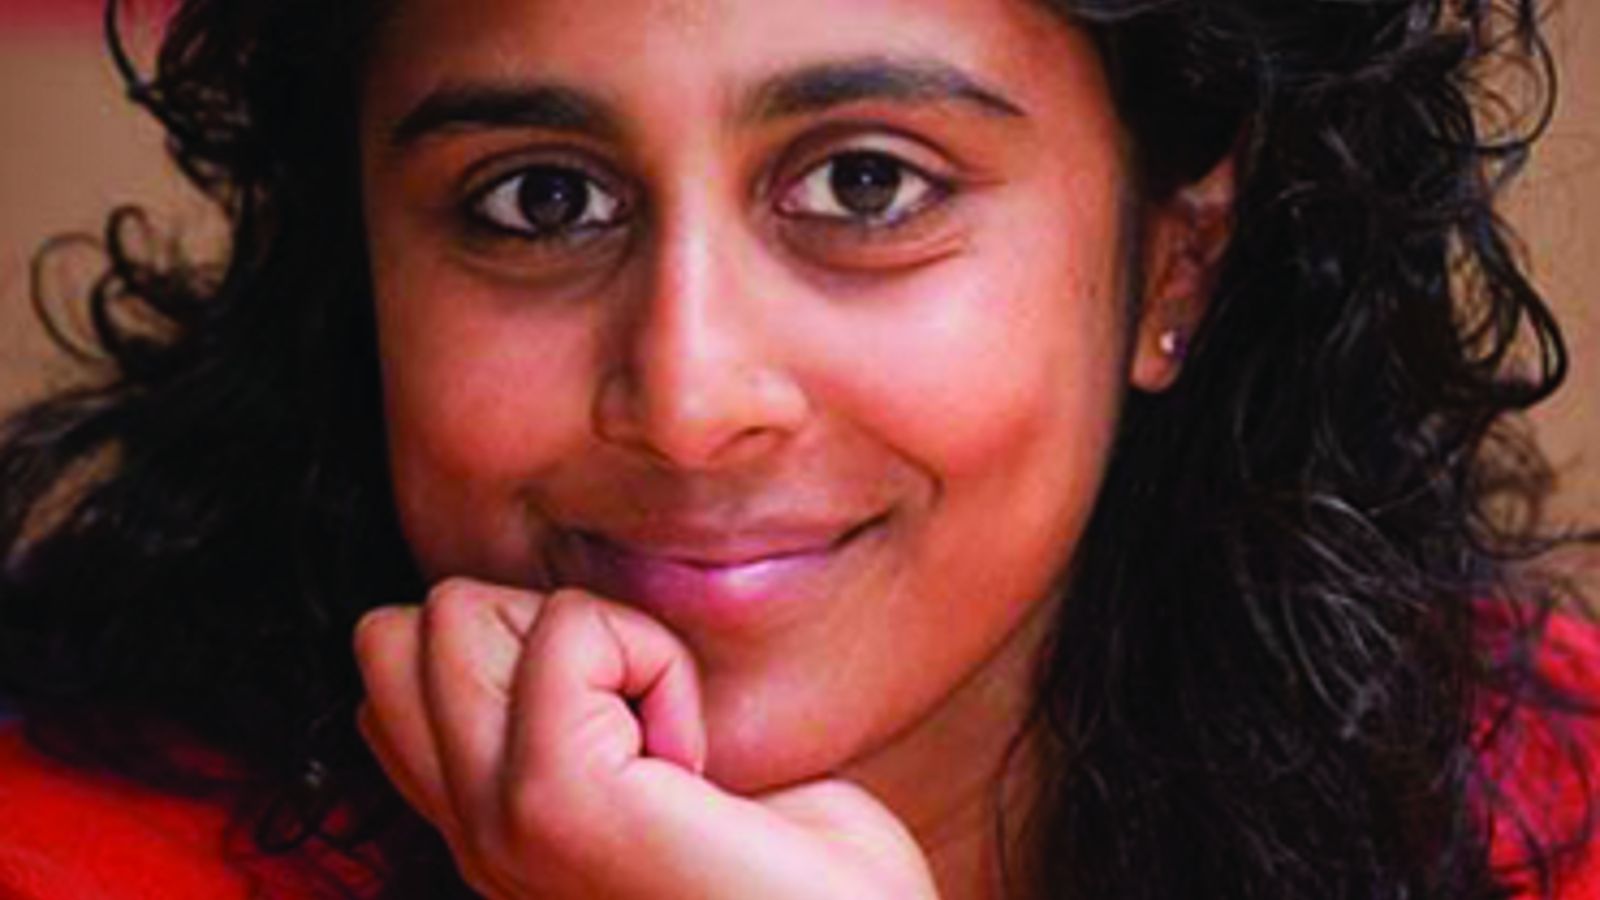 Photo of Anushka Brooking née Perinpanayagam. Anushka has dark, curly hair and holds her chin in her hand.